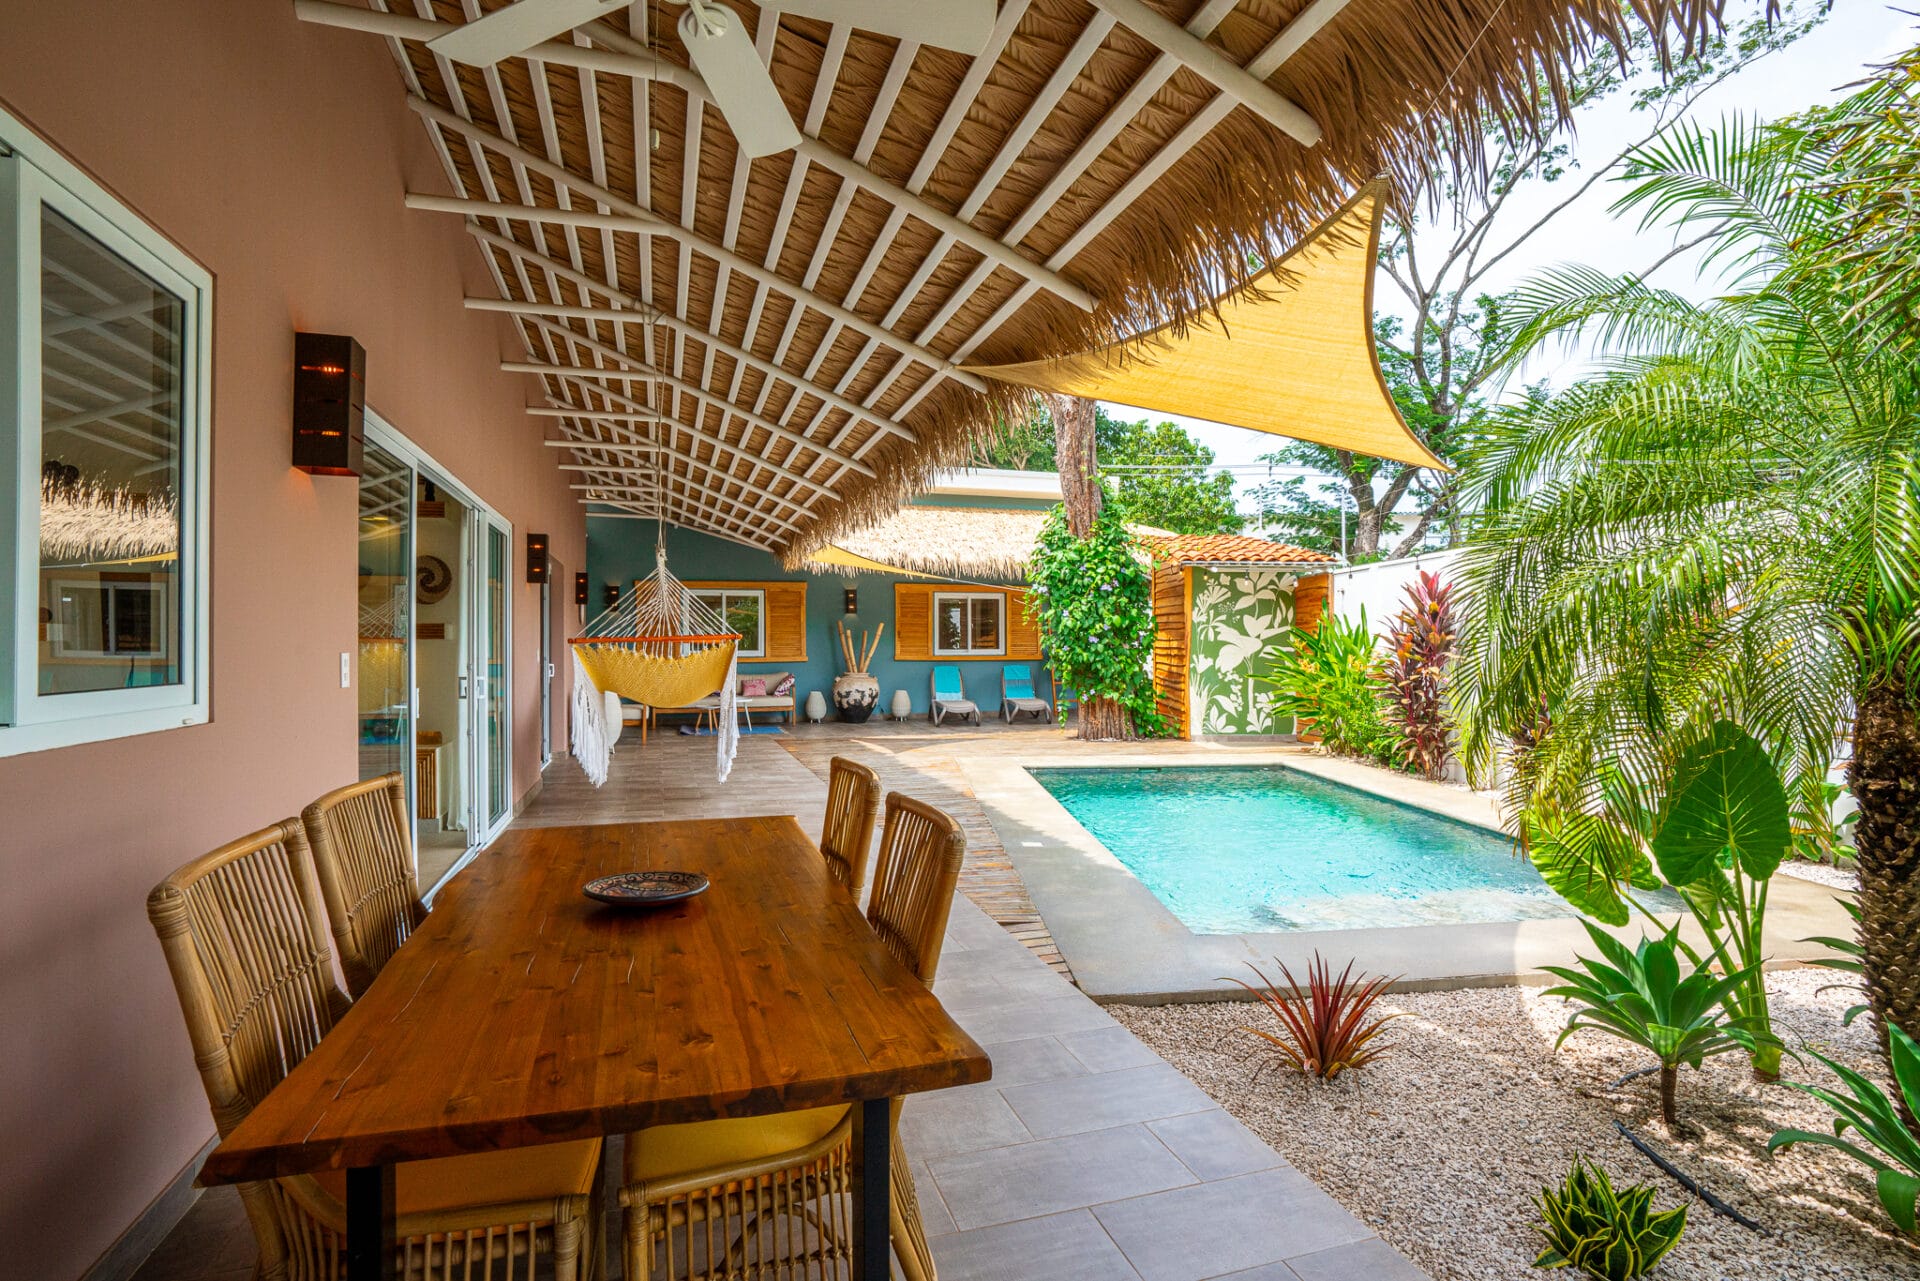 Discover Your Dream Oasis Home in the Heart of Tamarindo Beach!